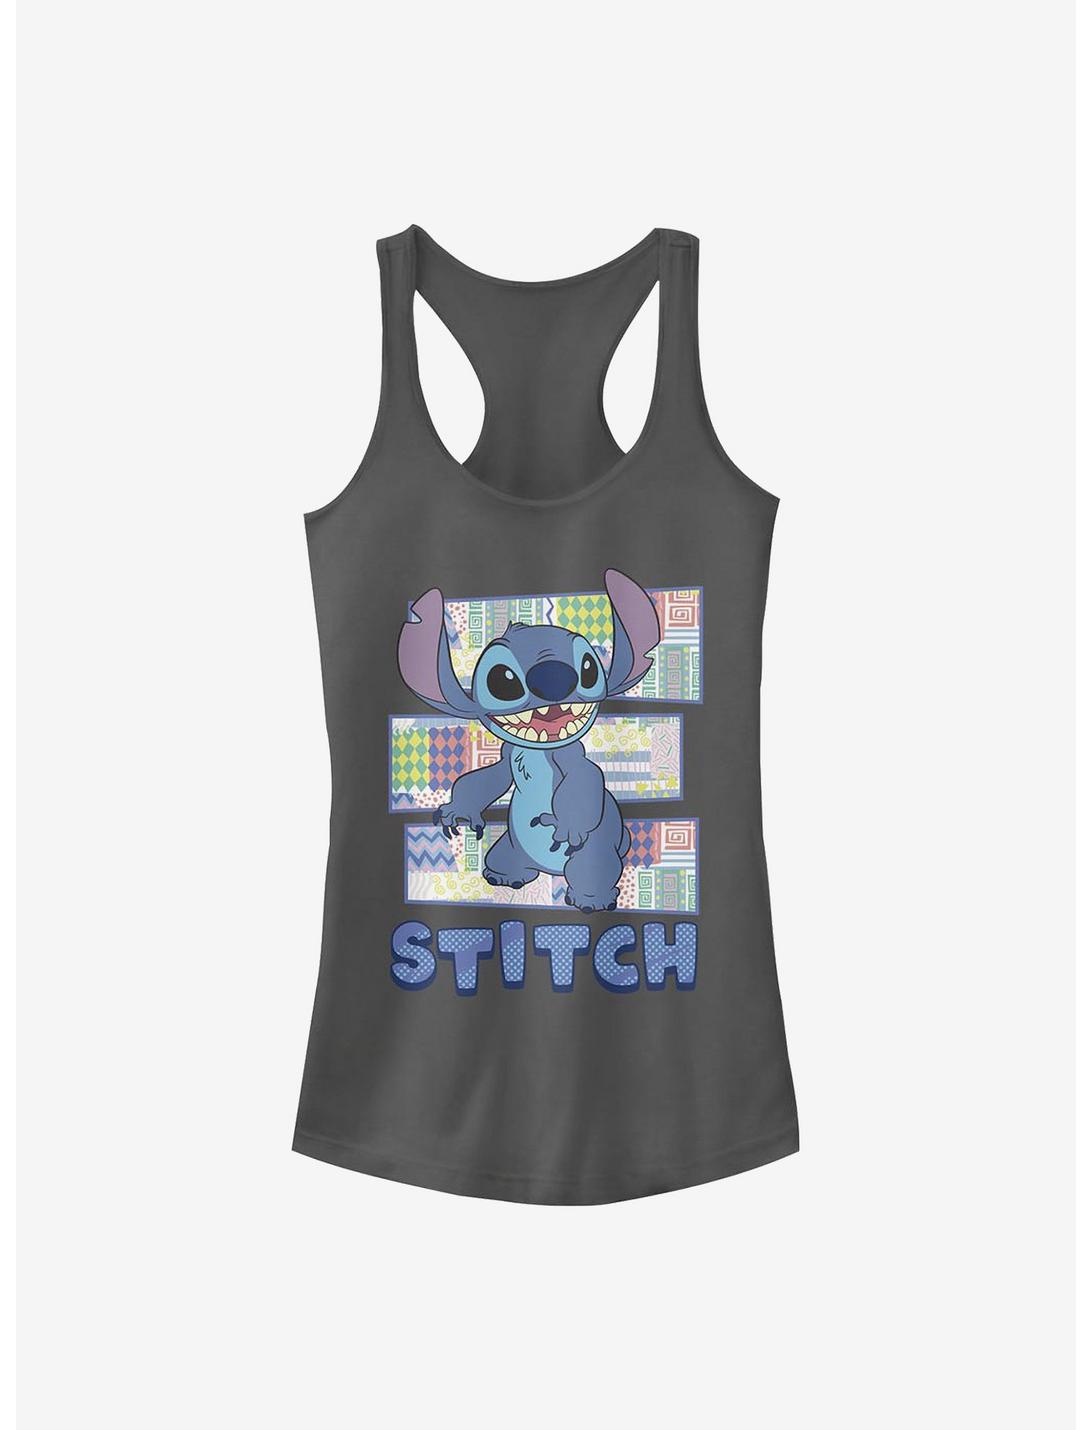 Disney Lilo & Stitch Character Shirt With Pattern Girls Tank, CHARCOAL, hi-res